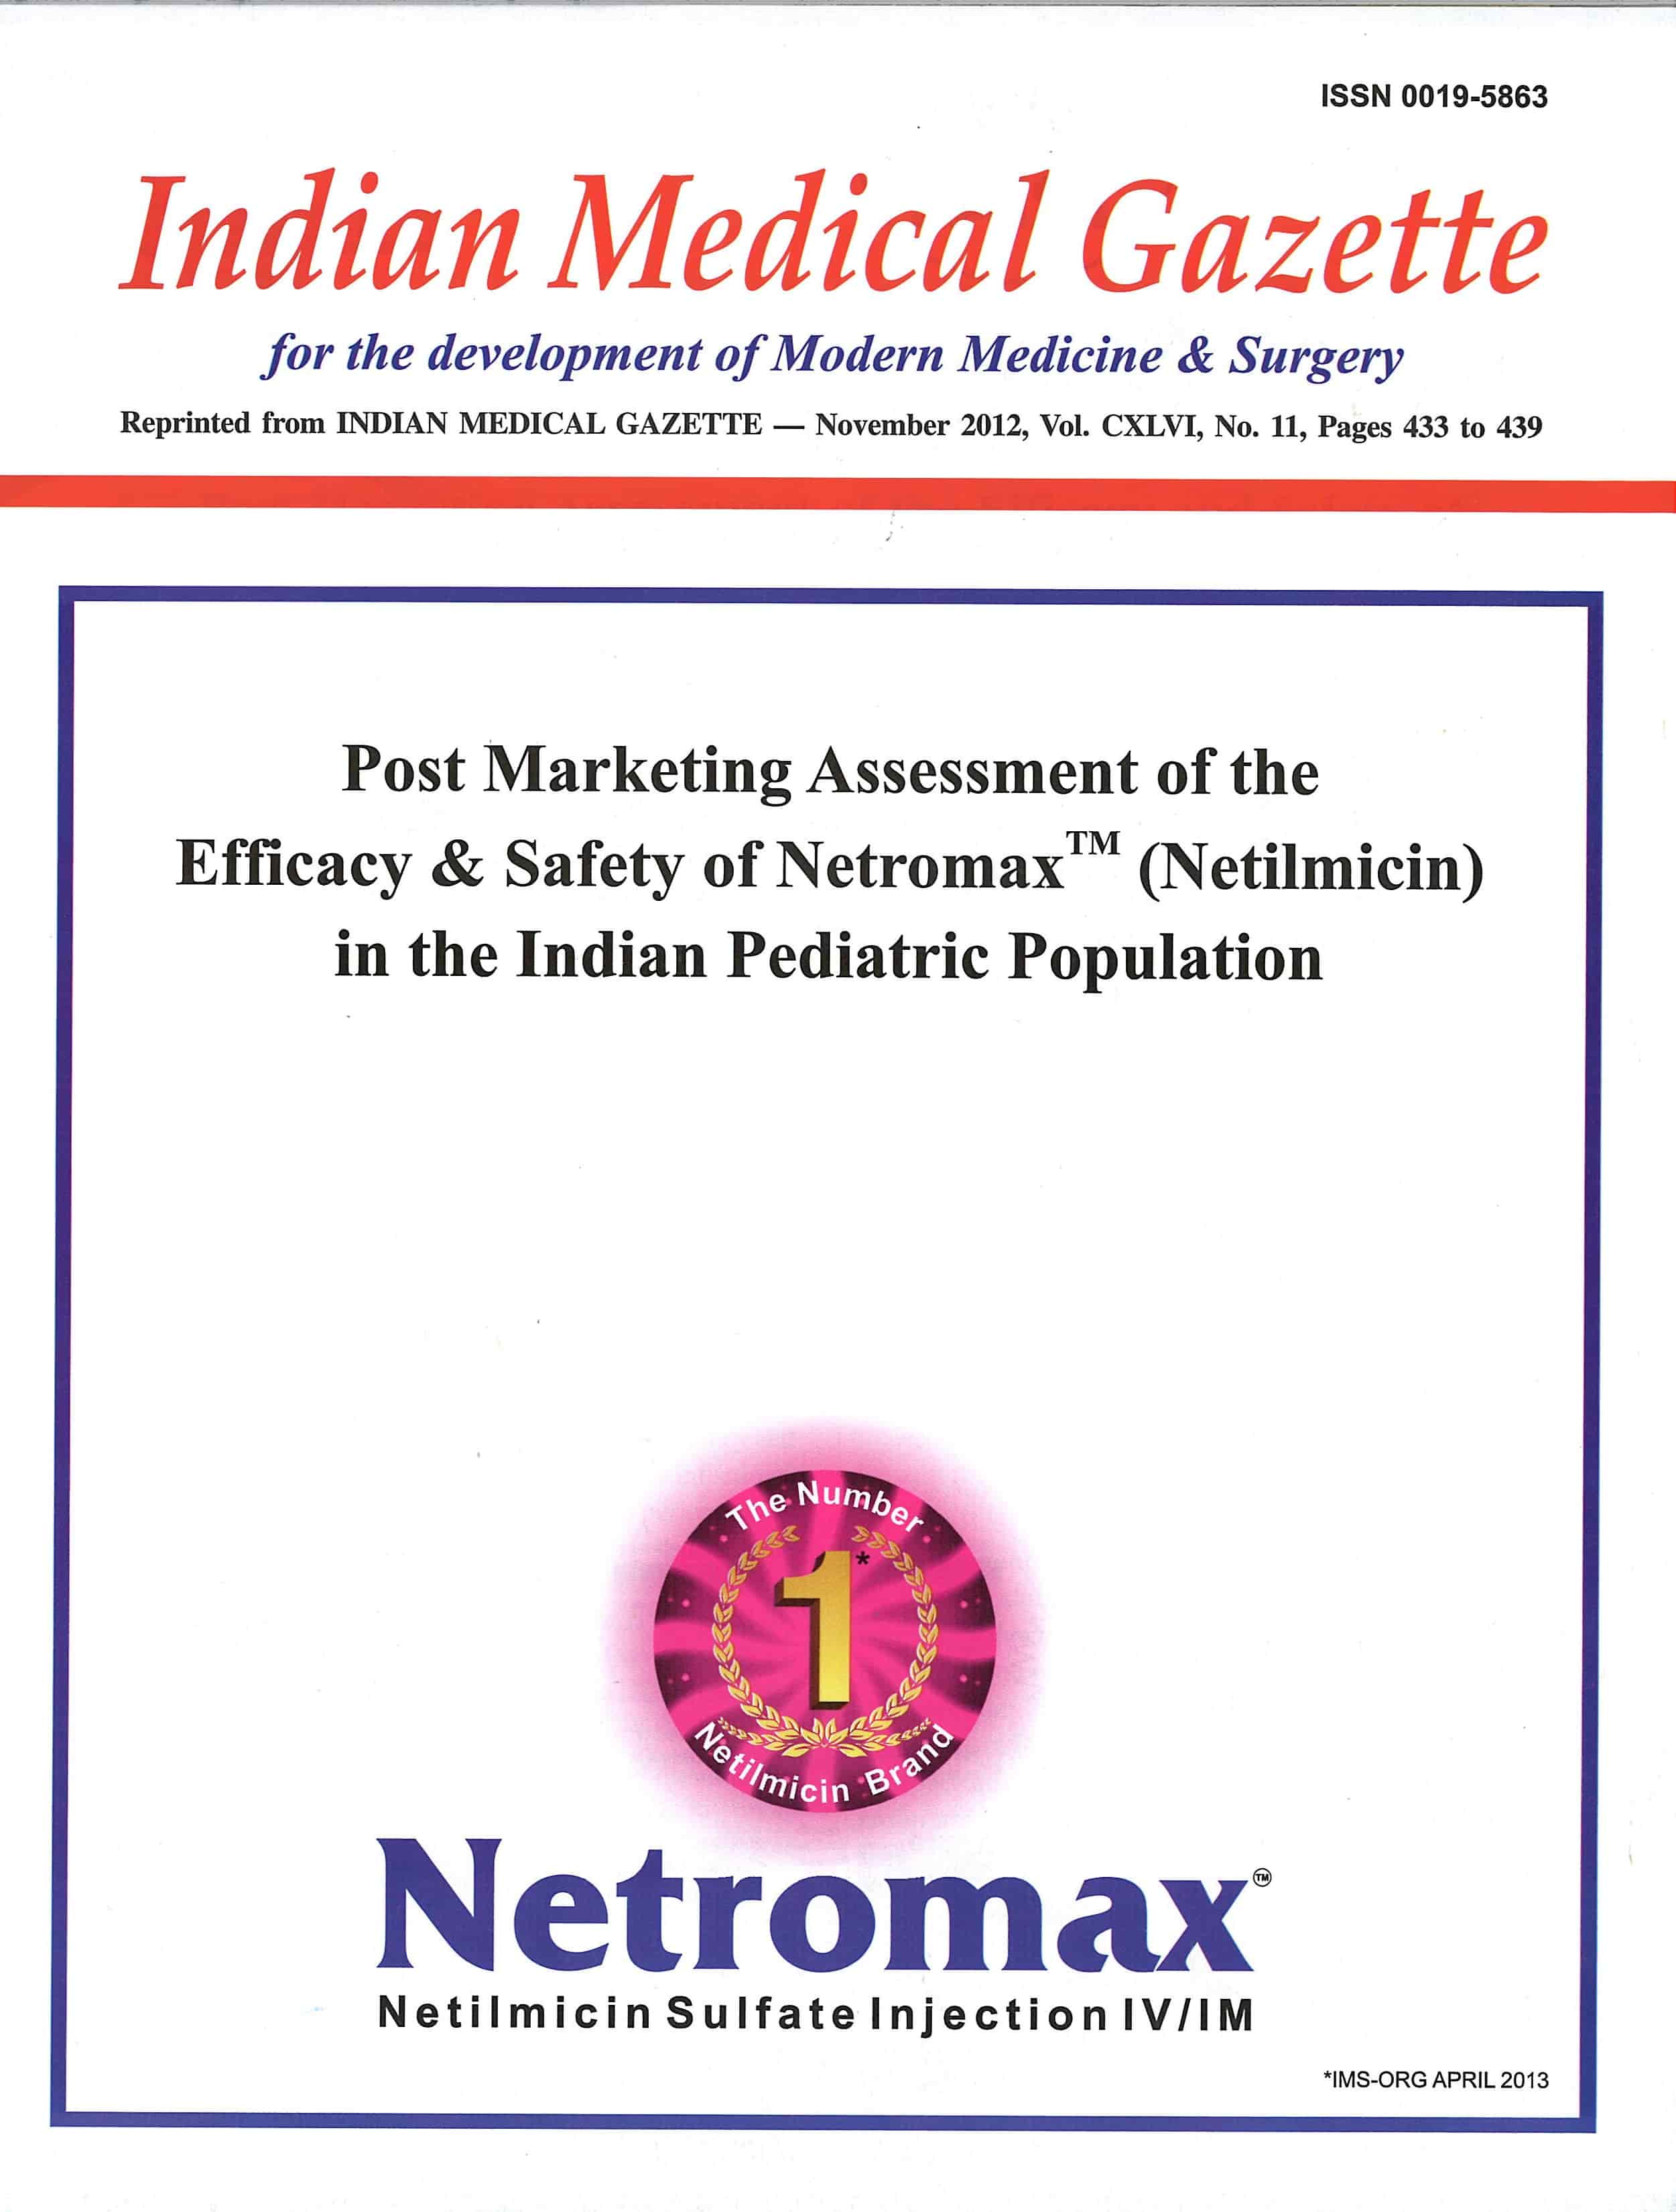 Post Marketing Assessment of the Efficacy and Safety of Netrornax" (Netilmicin) in the Indian Pediatric Population